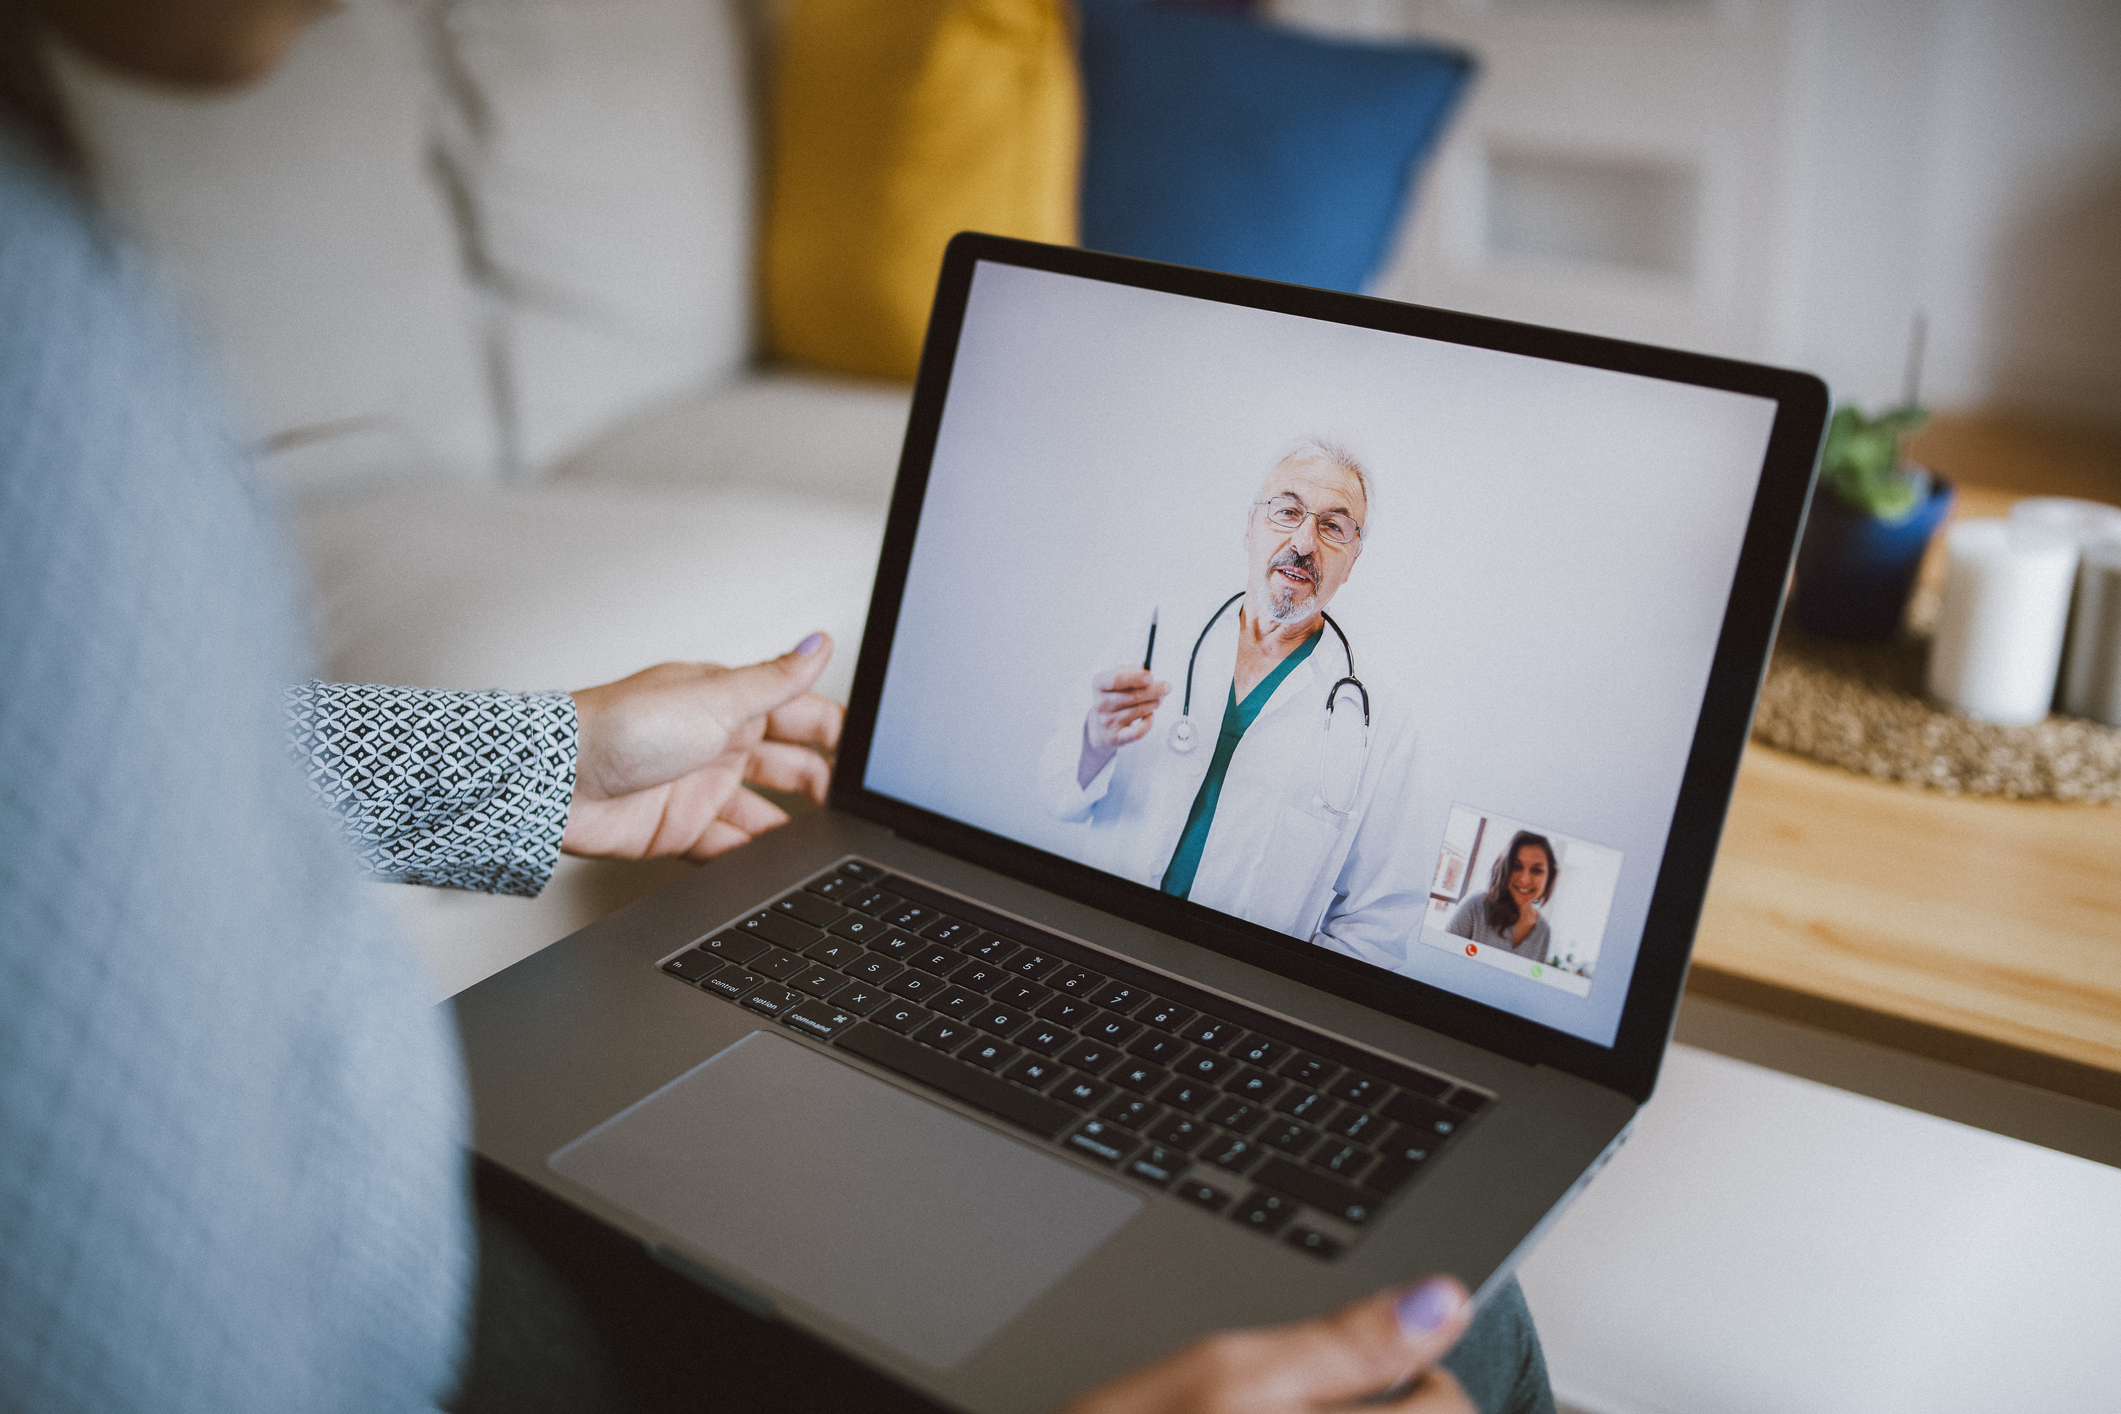 How Physician Medication Dispensing Can Improve Virtual Telehealth Visits - Proficient Rx